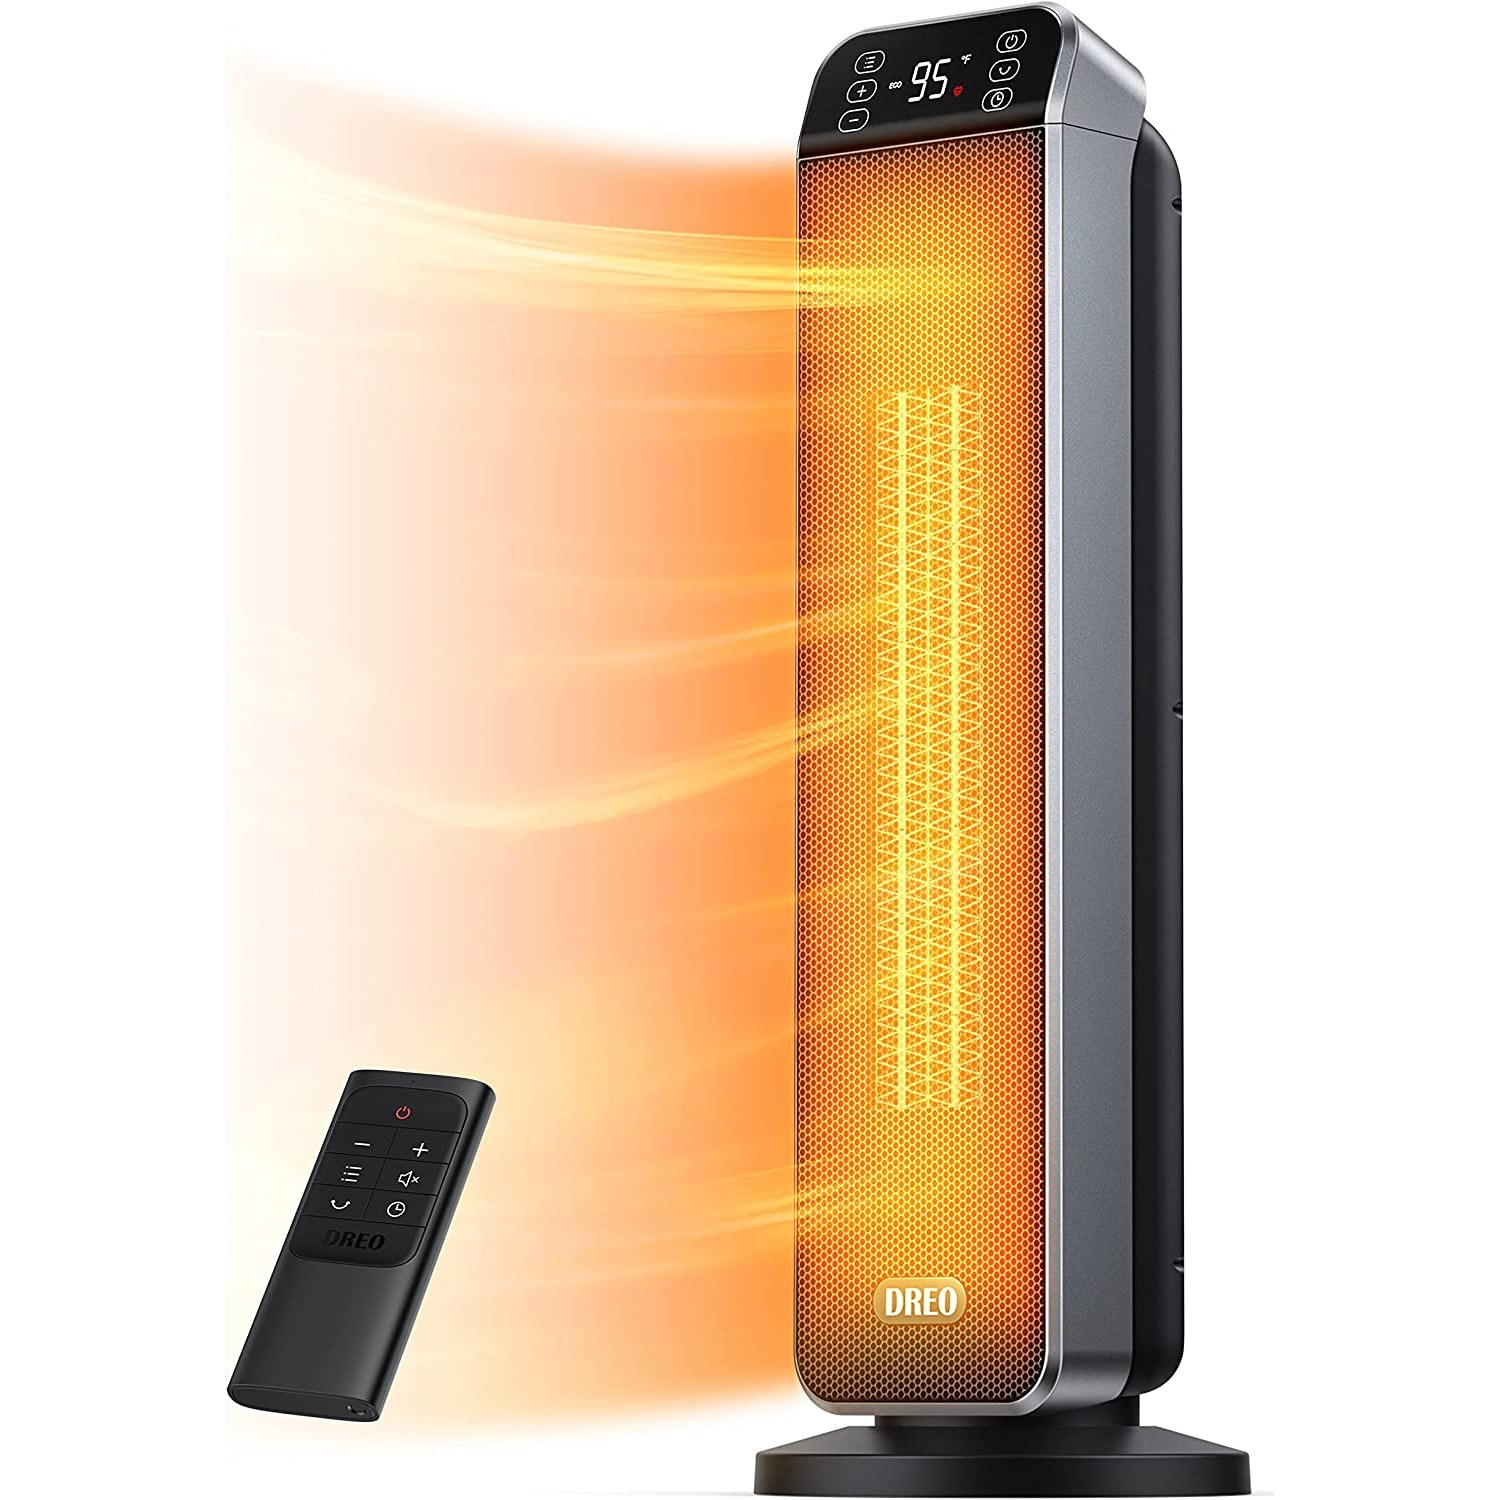 https://ak1.ostkcdn.com/images/products/is/images/direct/926cdea0a899aa20b6e70a27ebea989ec3f6c1a6/Dreo-24%22-Space-Heater%2C-Portable-Electric-Heater-with-Remote-Control.jpg